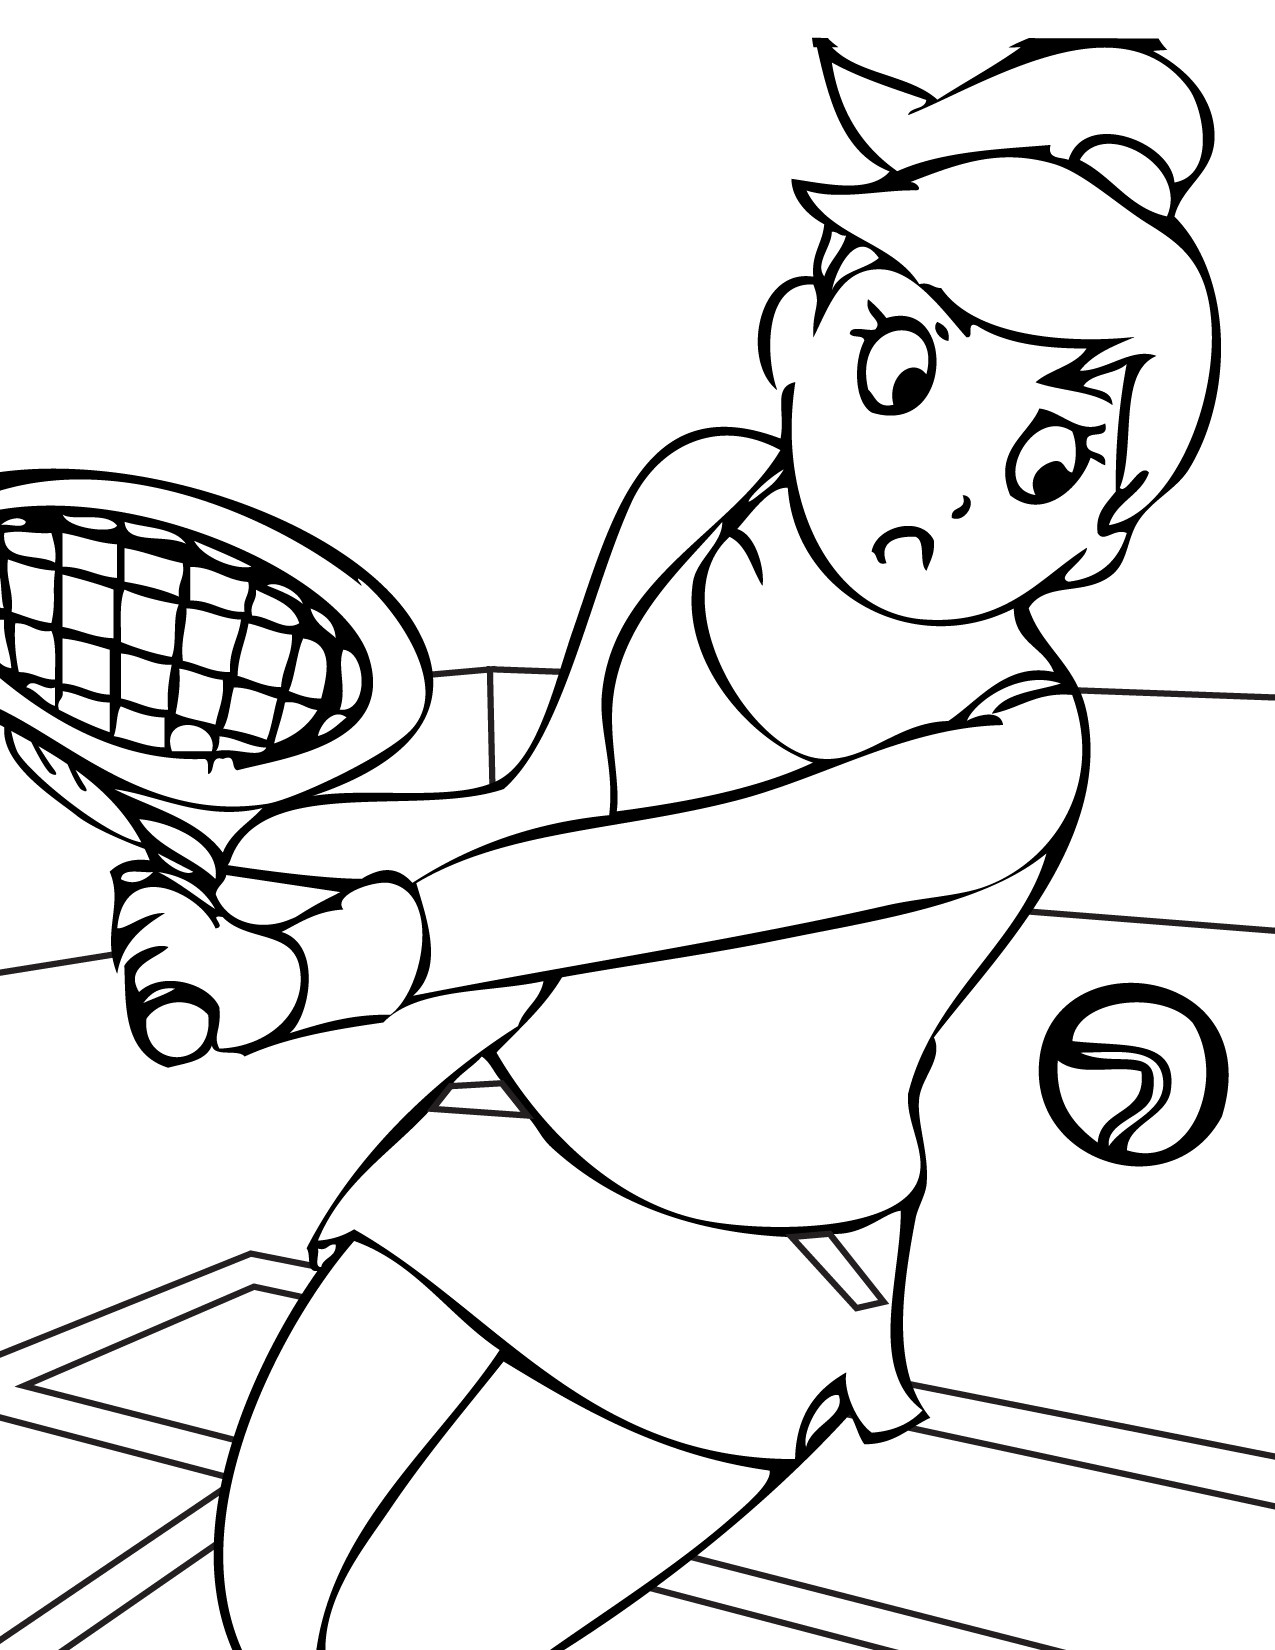 Sports Coloring Pages For Girls
 Tennis Sports Coloring pages for GIRLS Free Printable